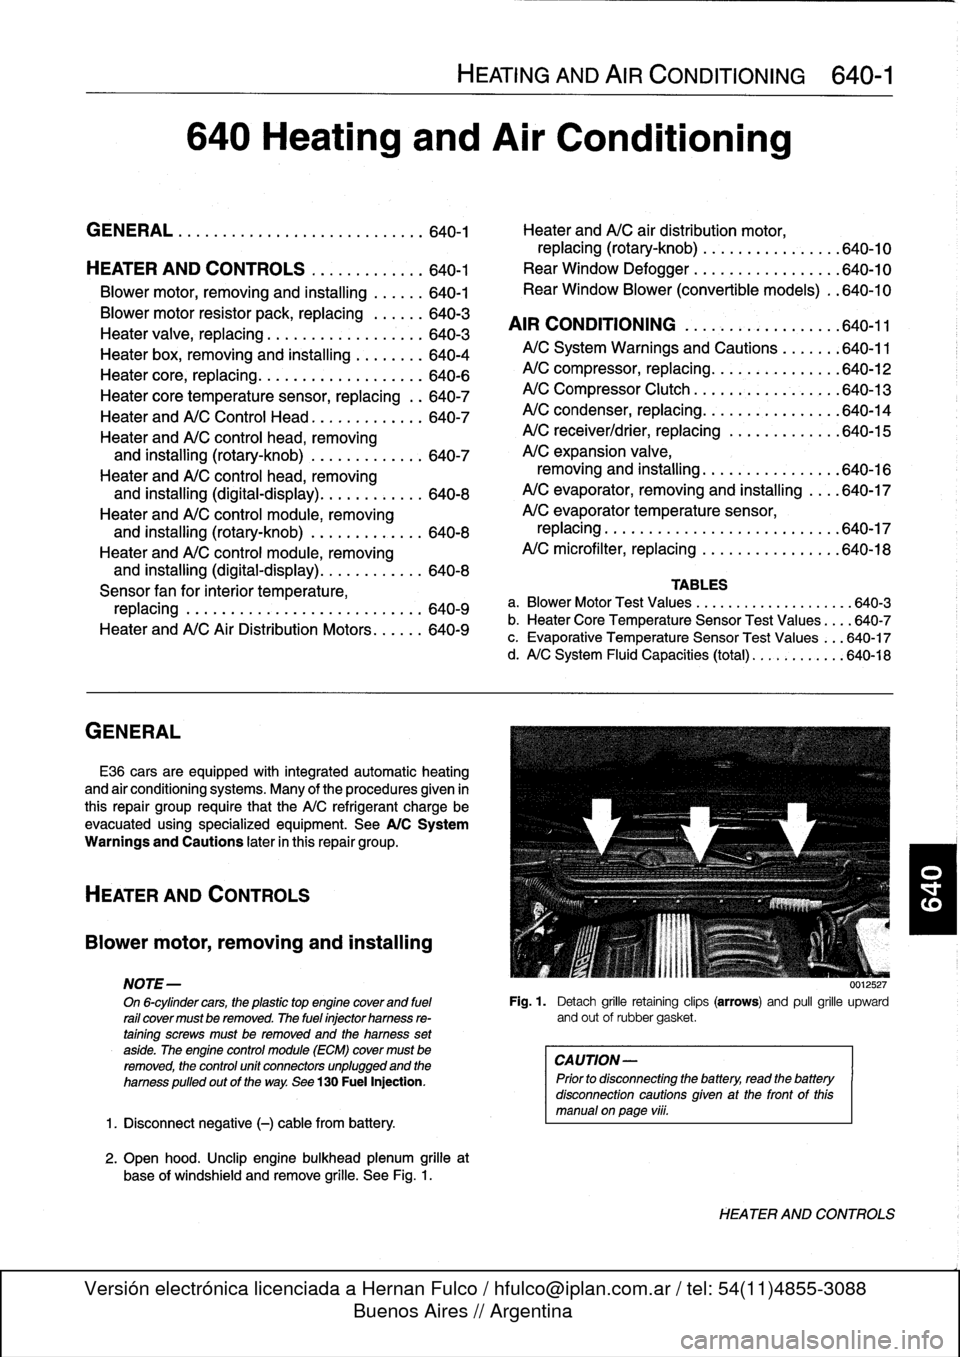 BMW 318i 1998 E36 Service Manual 
GENERAL

E36
cars
are
equipped
with
integrated
automatic
heating

and
air
conditioning
systems
.
Many
of
the
procedures
given
in

this
repair
group
require
that
the
A/C
refrigerant
charge
be

evacuat